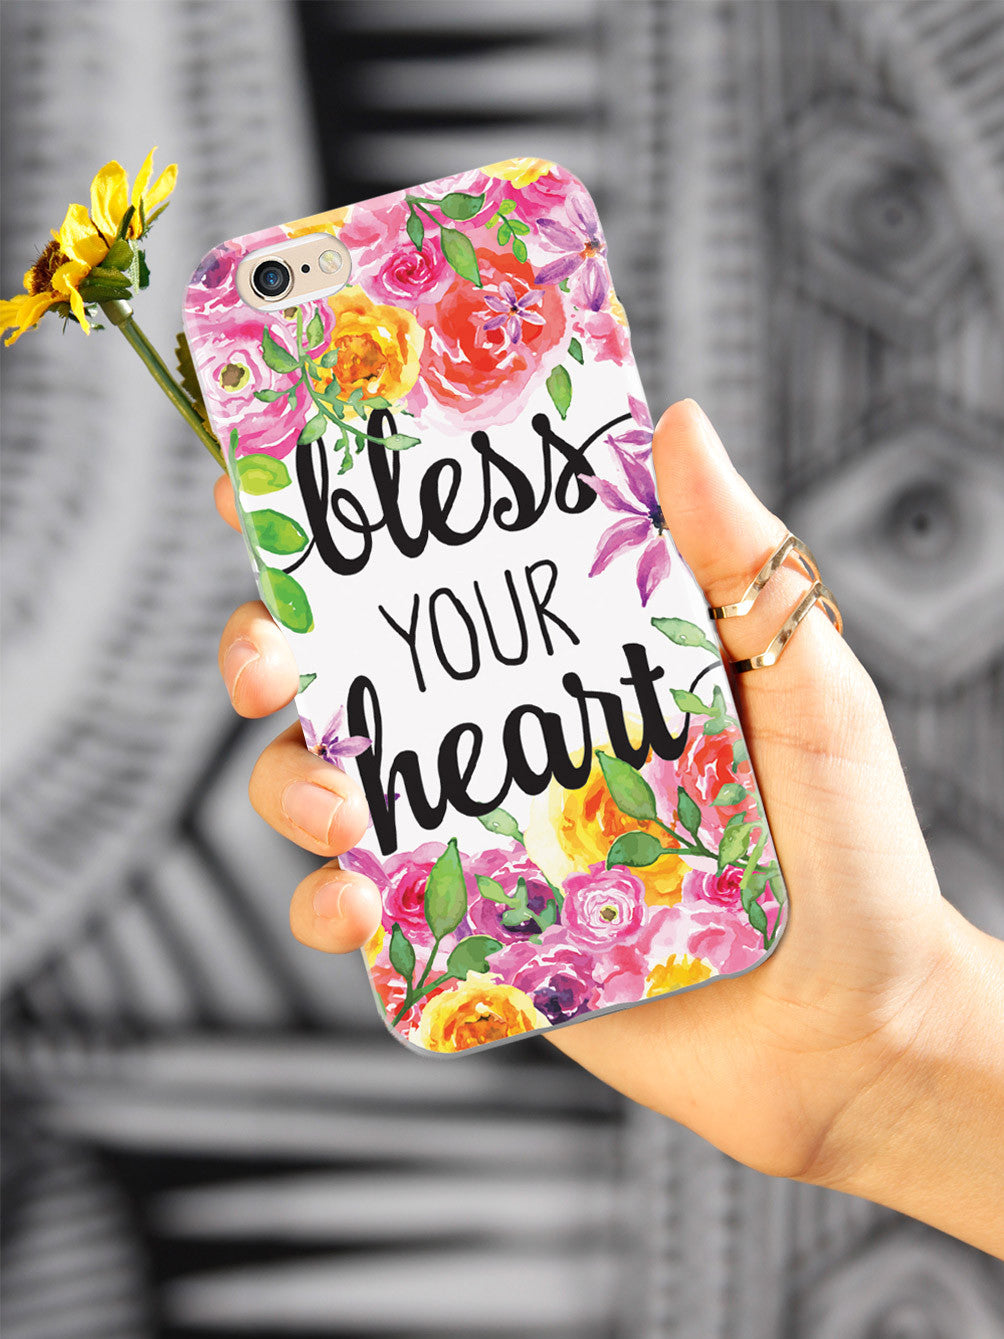 Bless Your Heart - Spring Watercolor Flowers Case